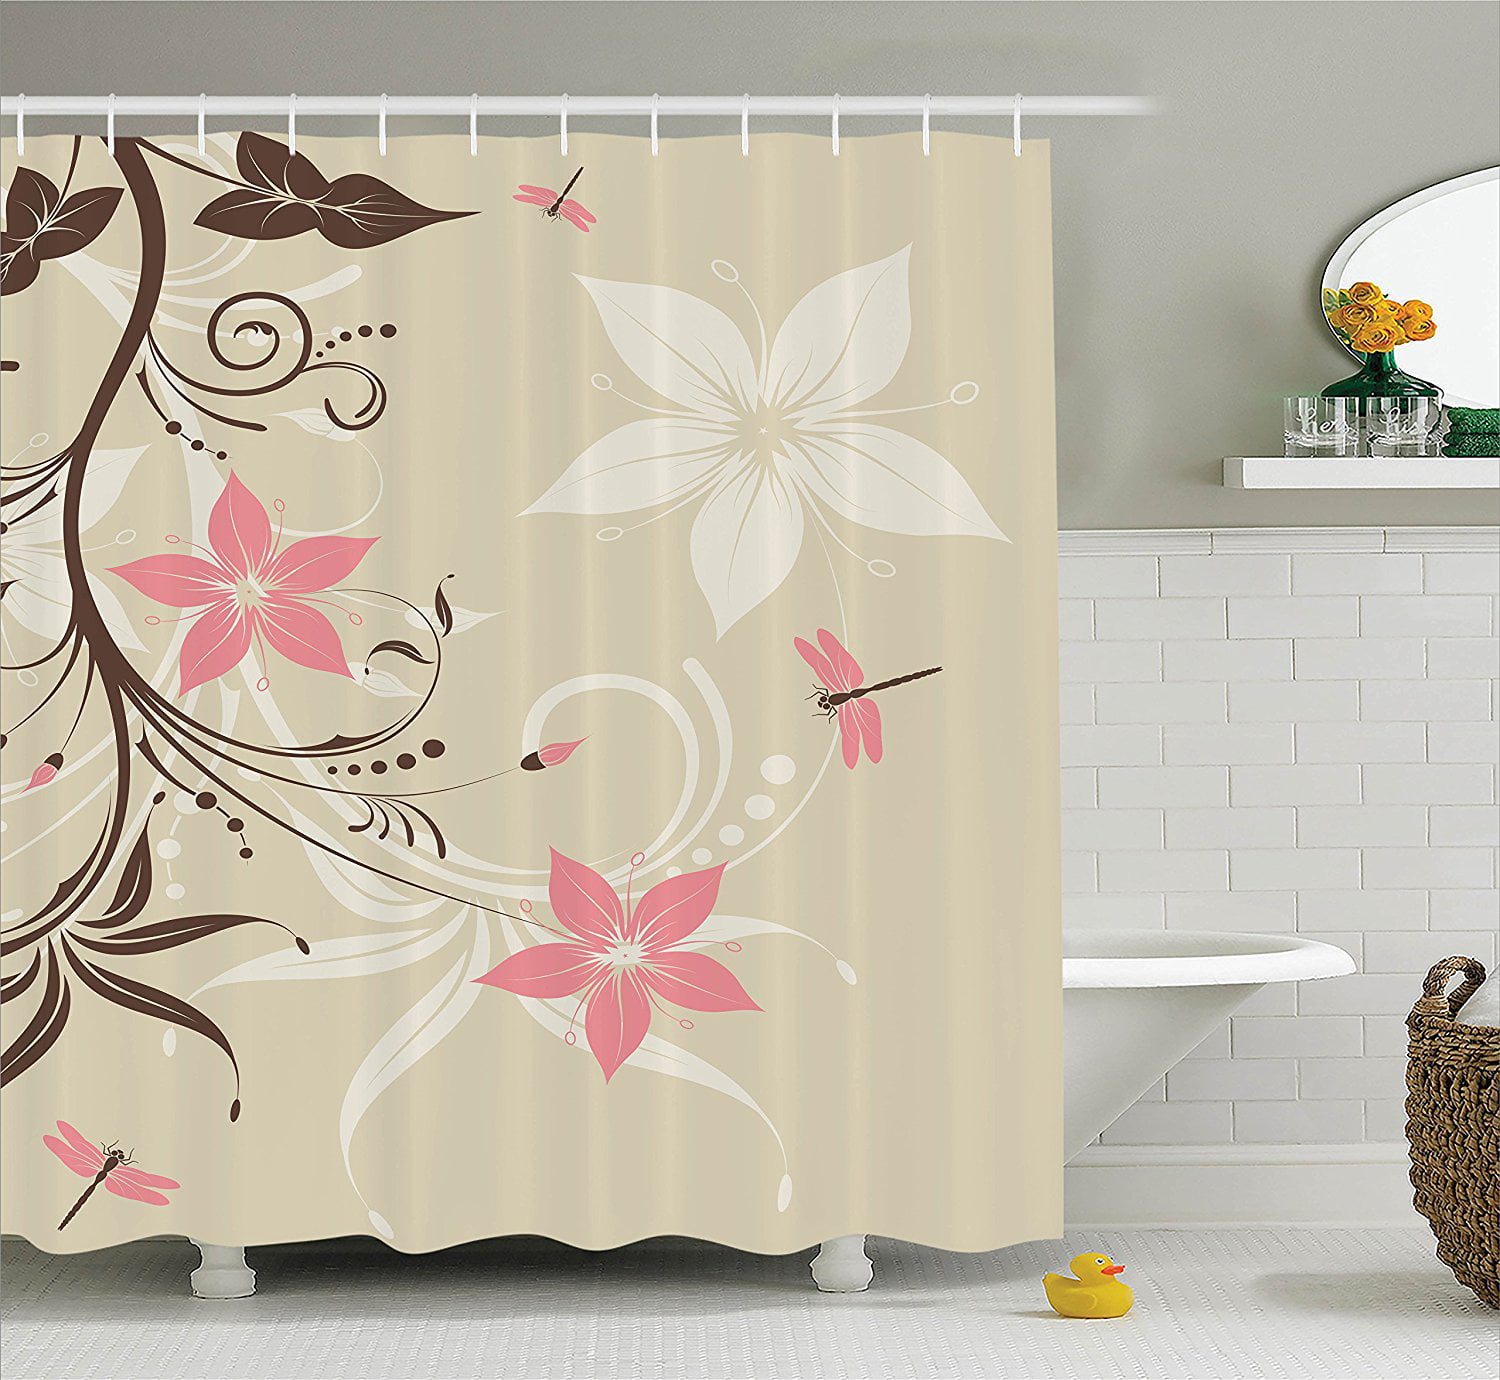 Details about   Boho Flower Shower Curtain Floral Plants Green Leaves Bathroom Accessory Sets 